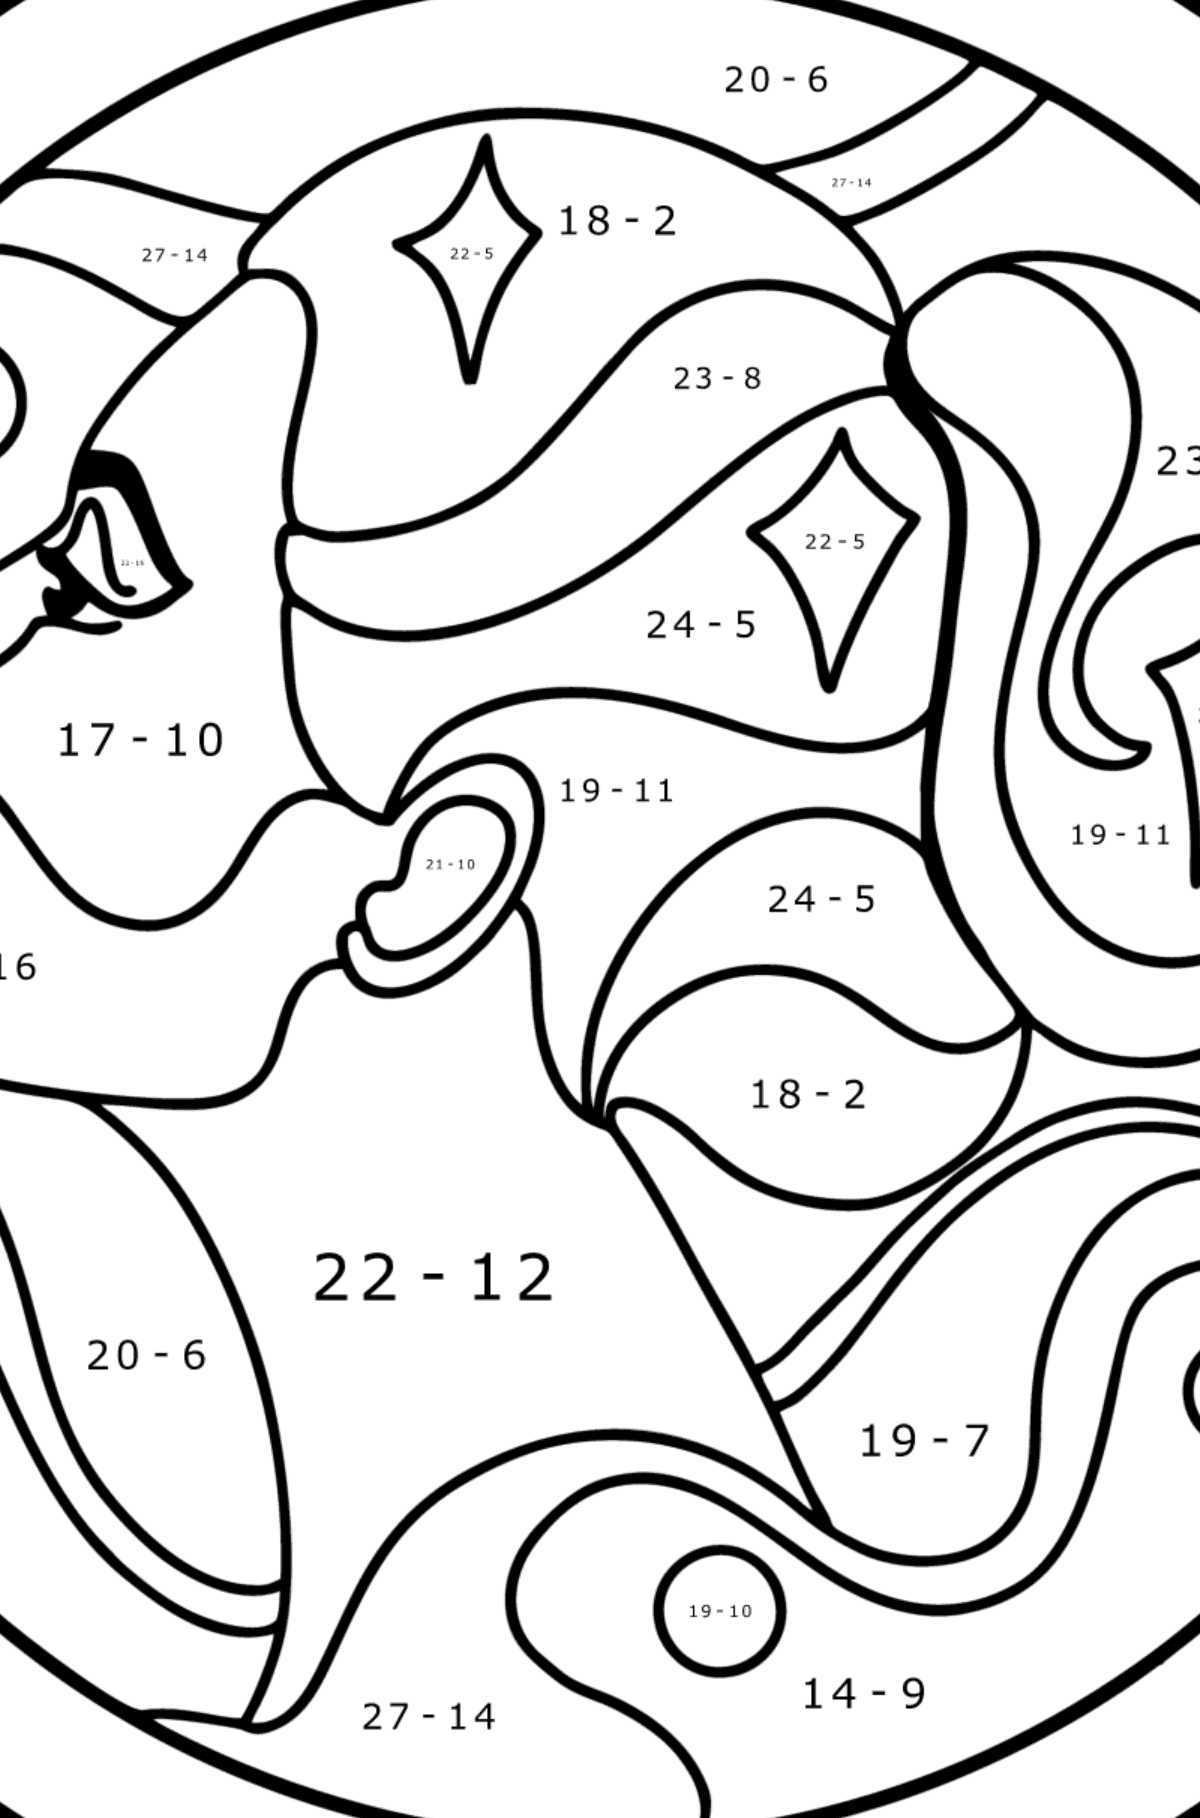 Coloring page for kids - zodiac sign Virgo - Math Coloring - Subtraction for Kids